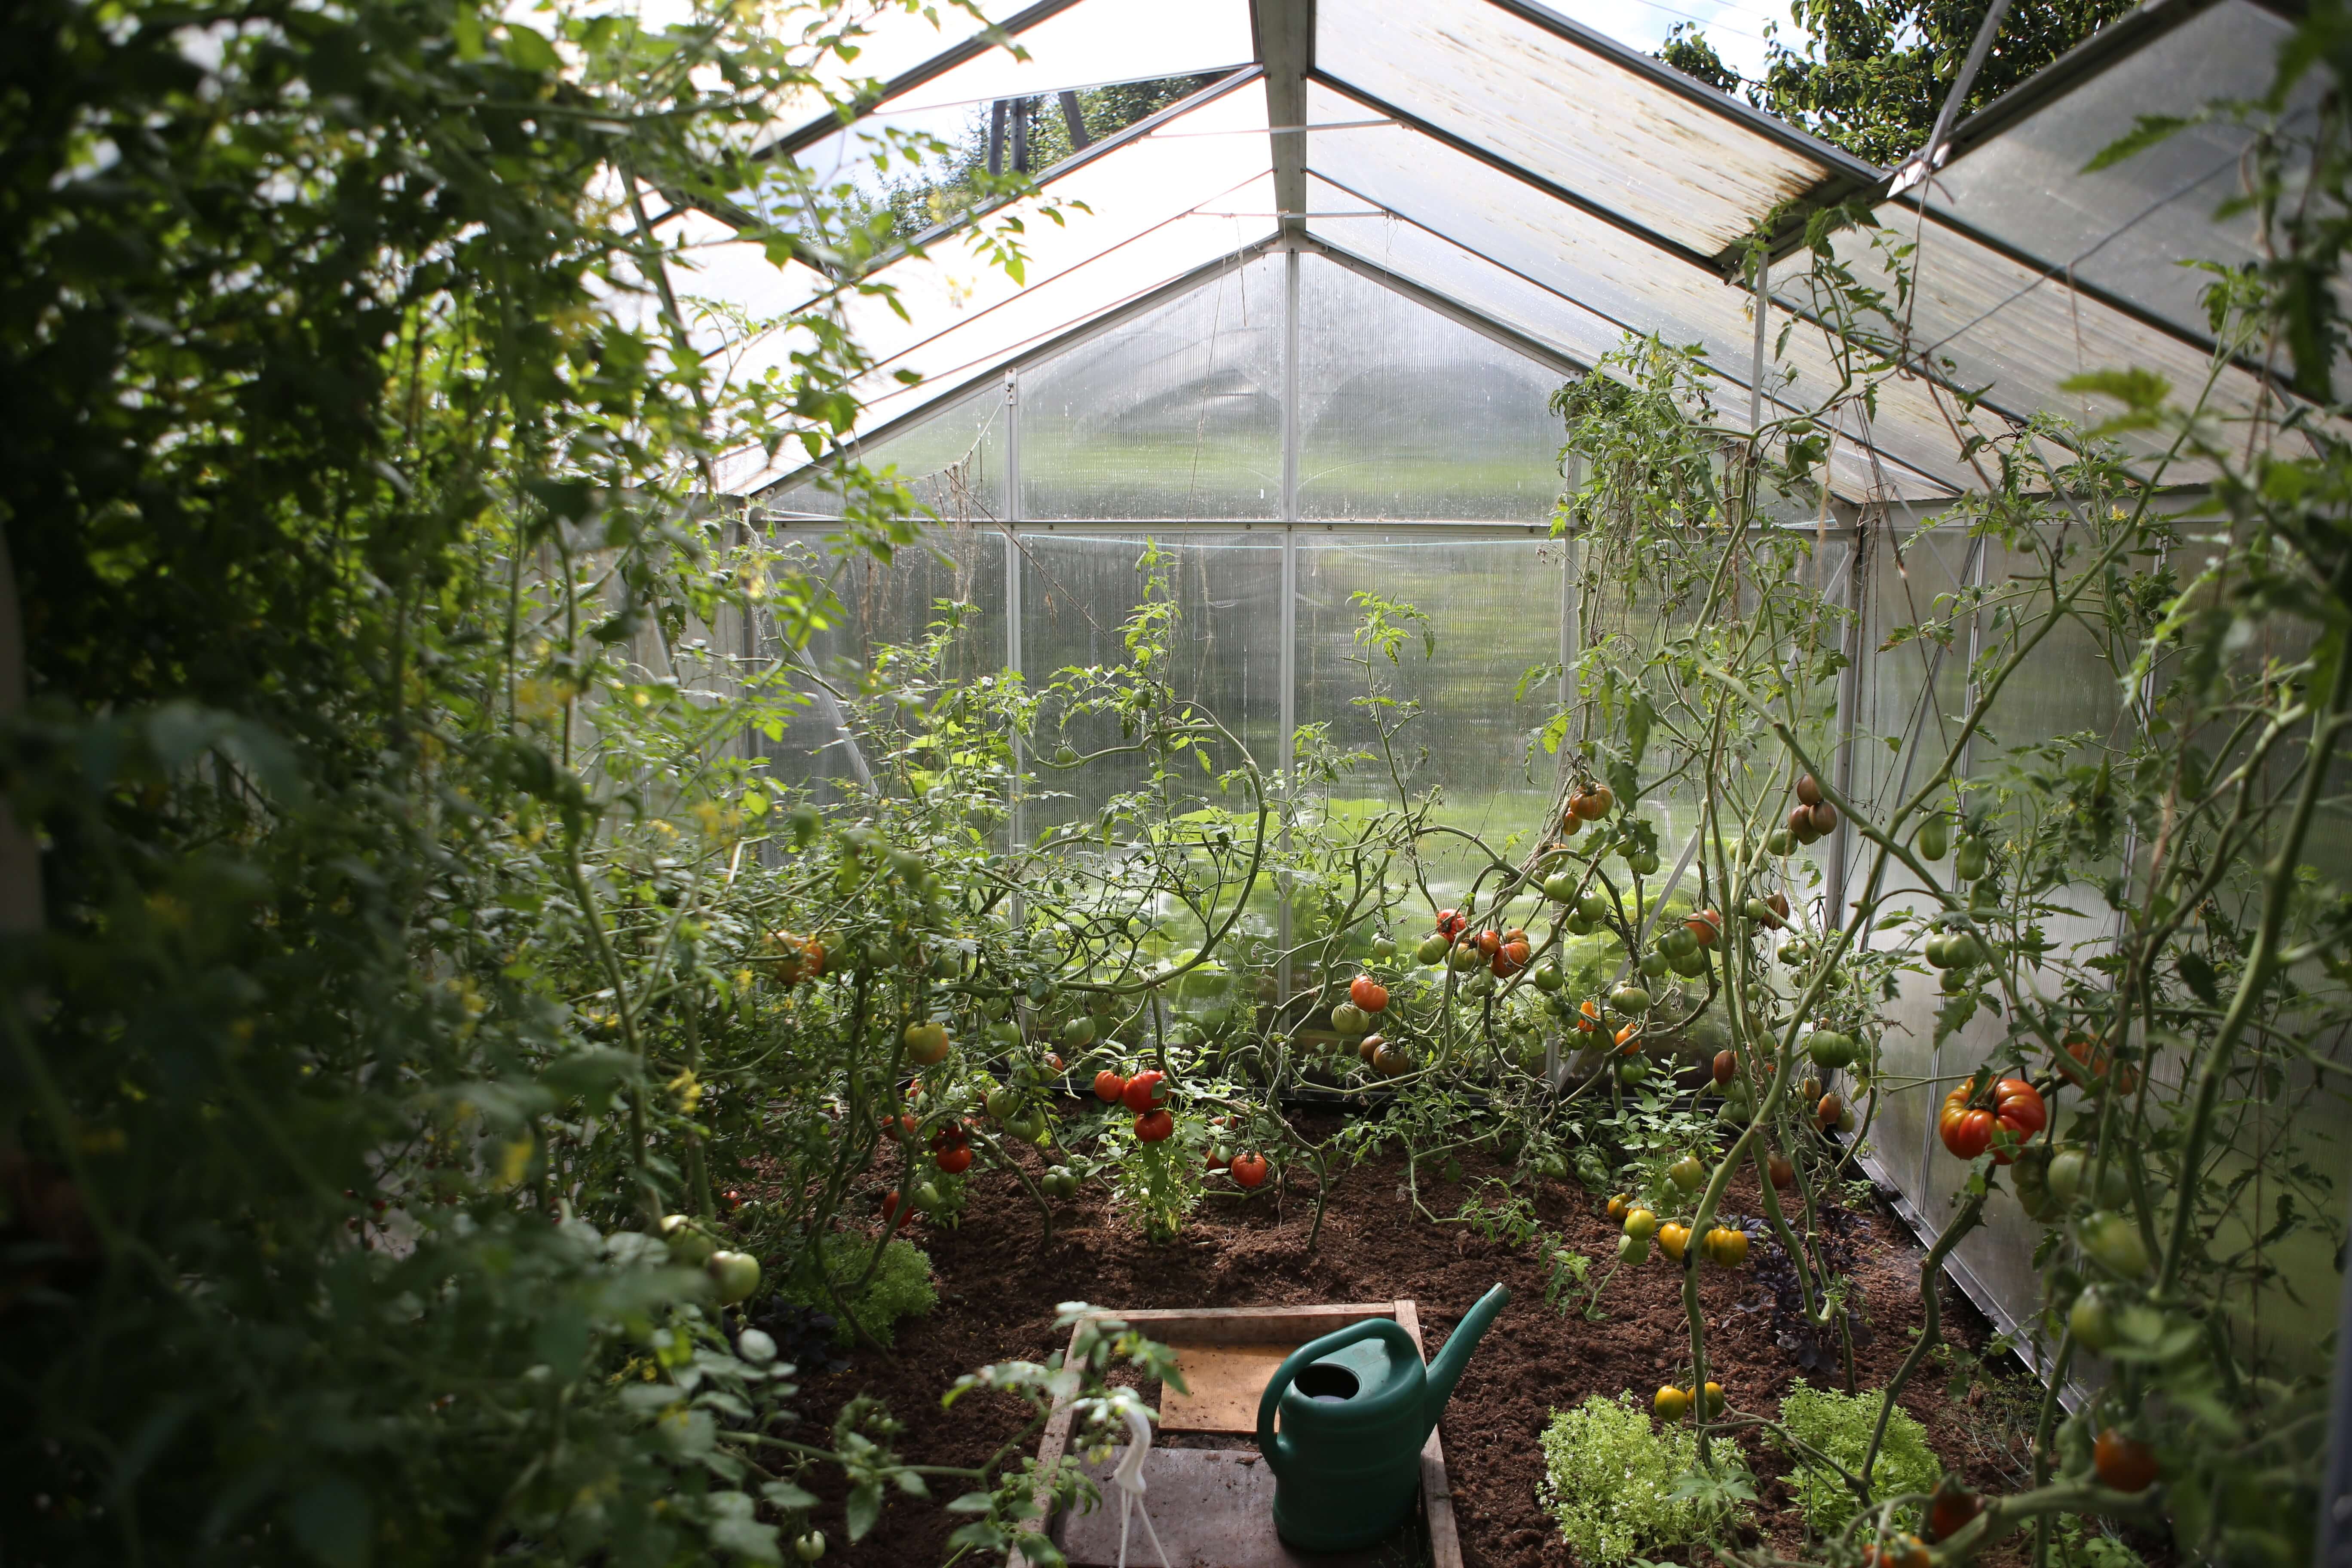 Tomatoes grown in a greenhouse